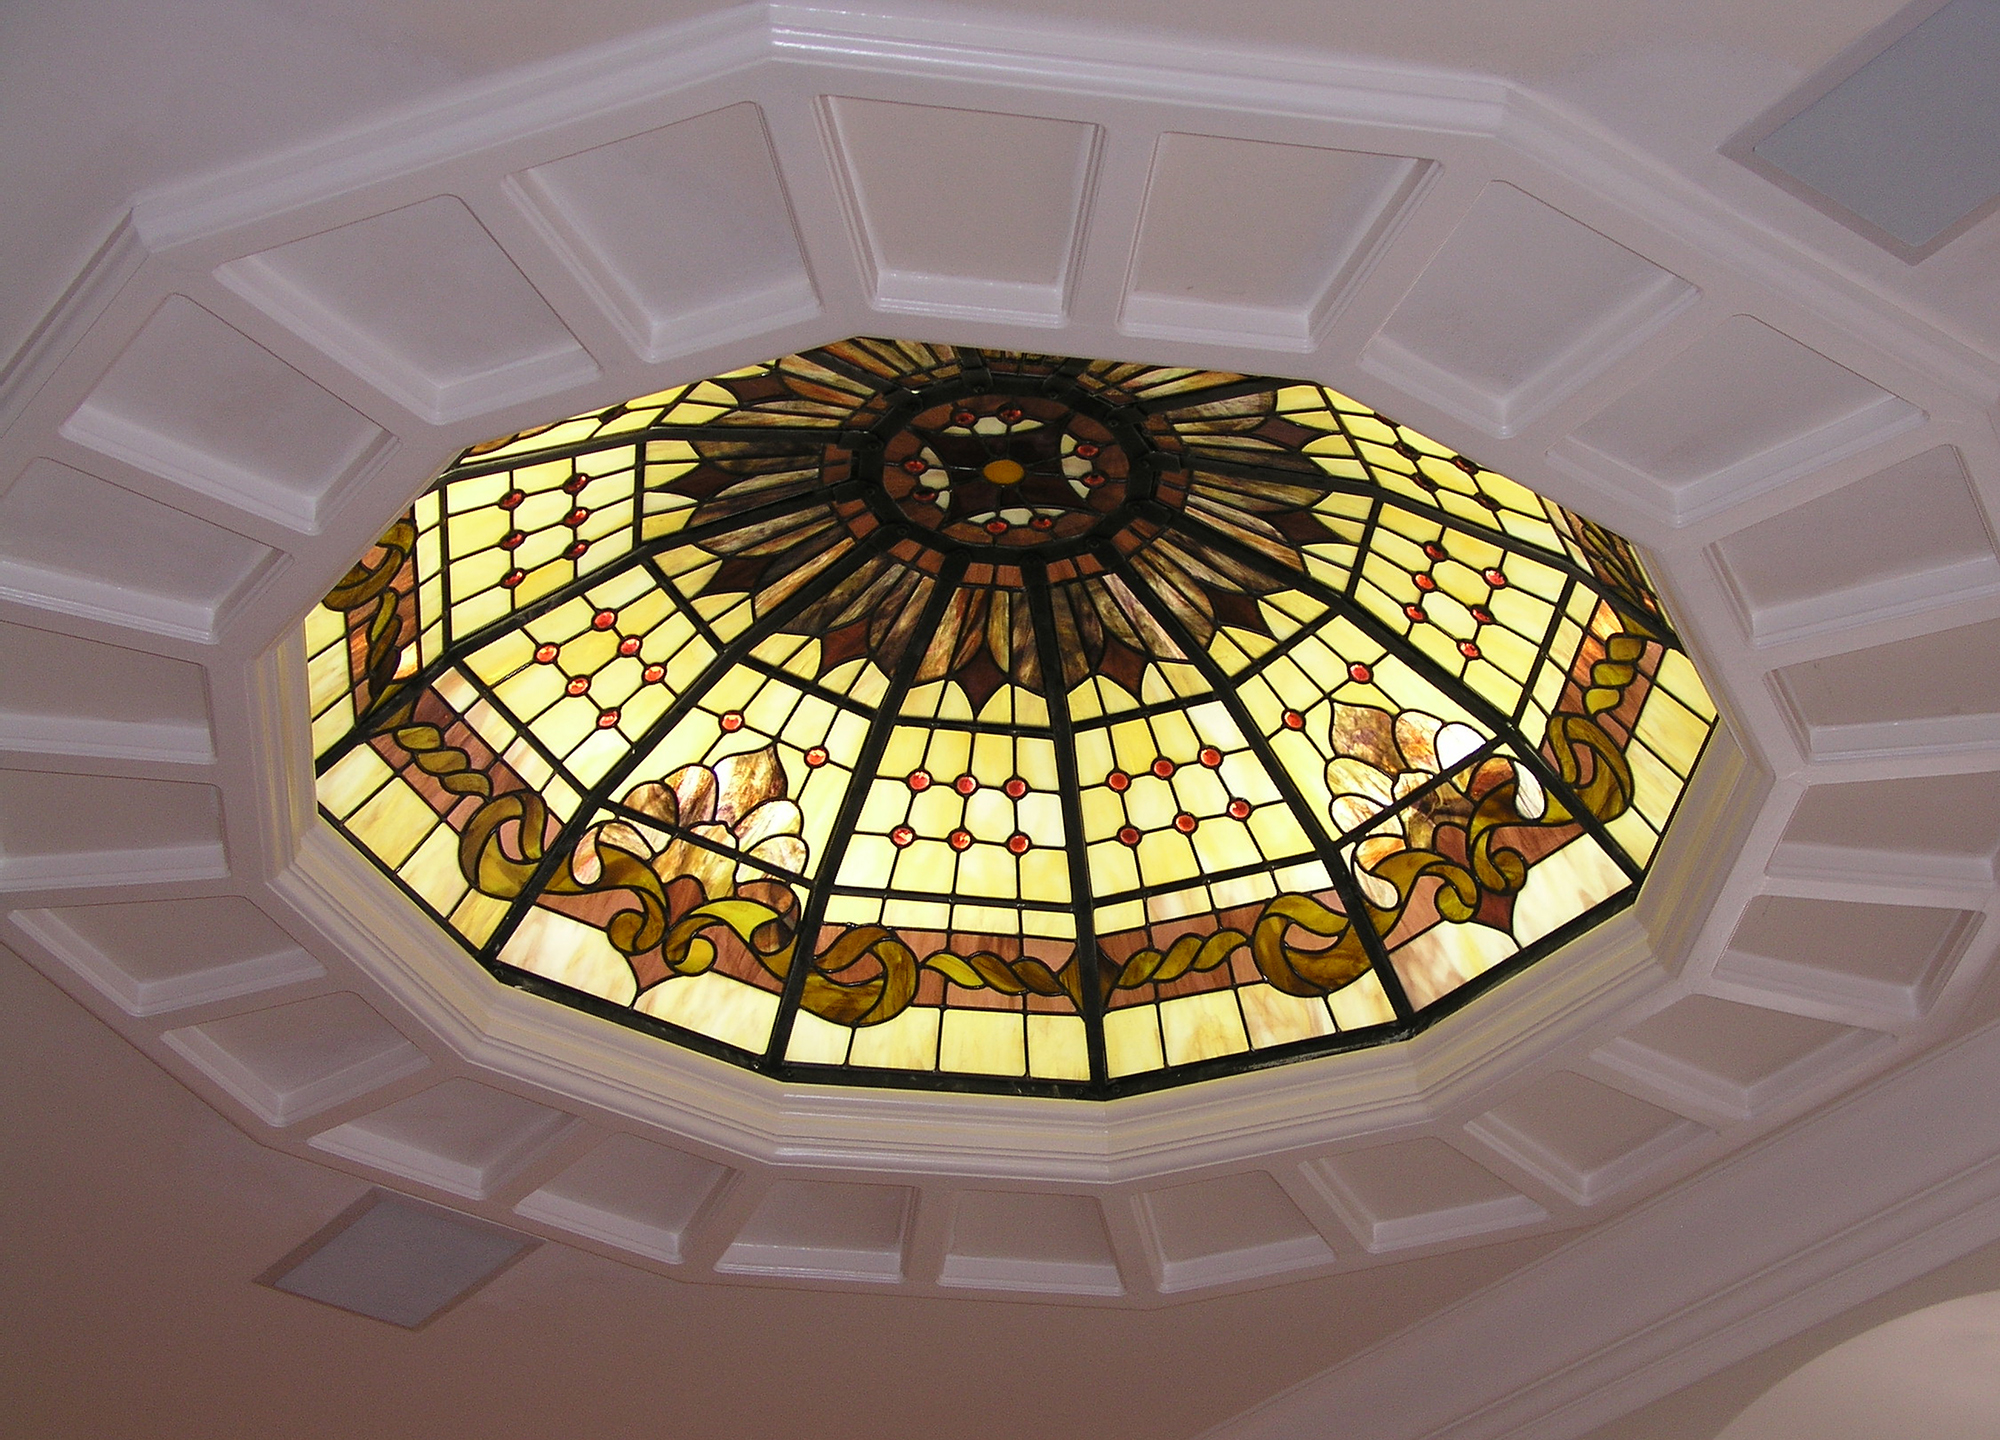 Ceiling dome with yellow, tan, beige, and brown glass in a Traditional style.